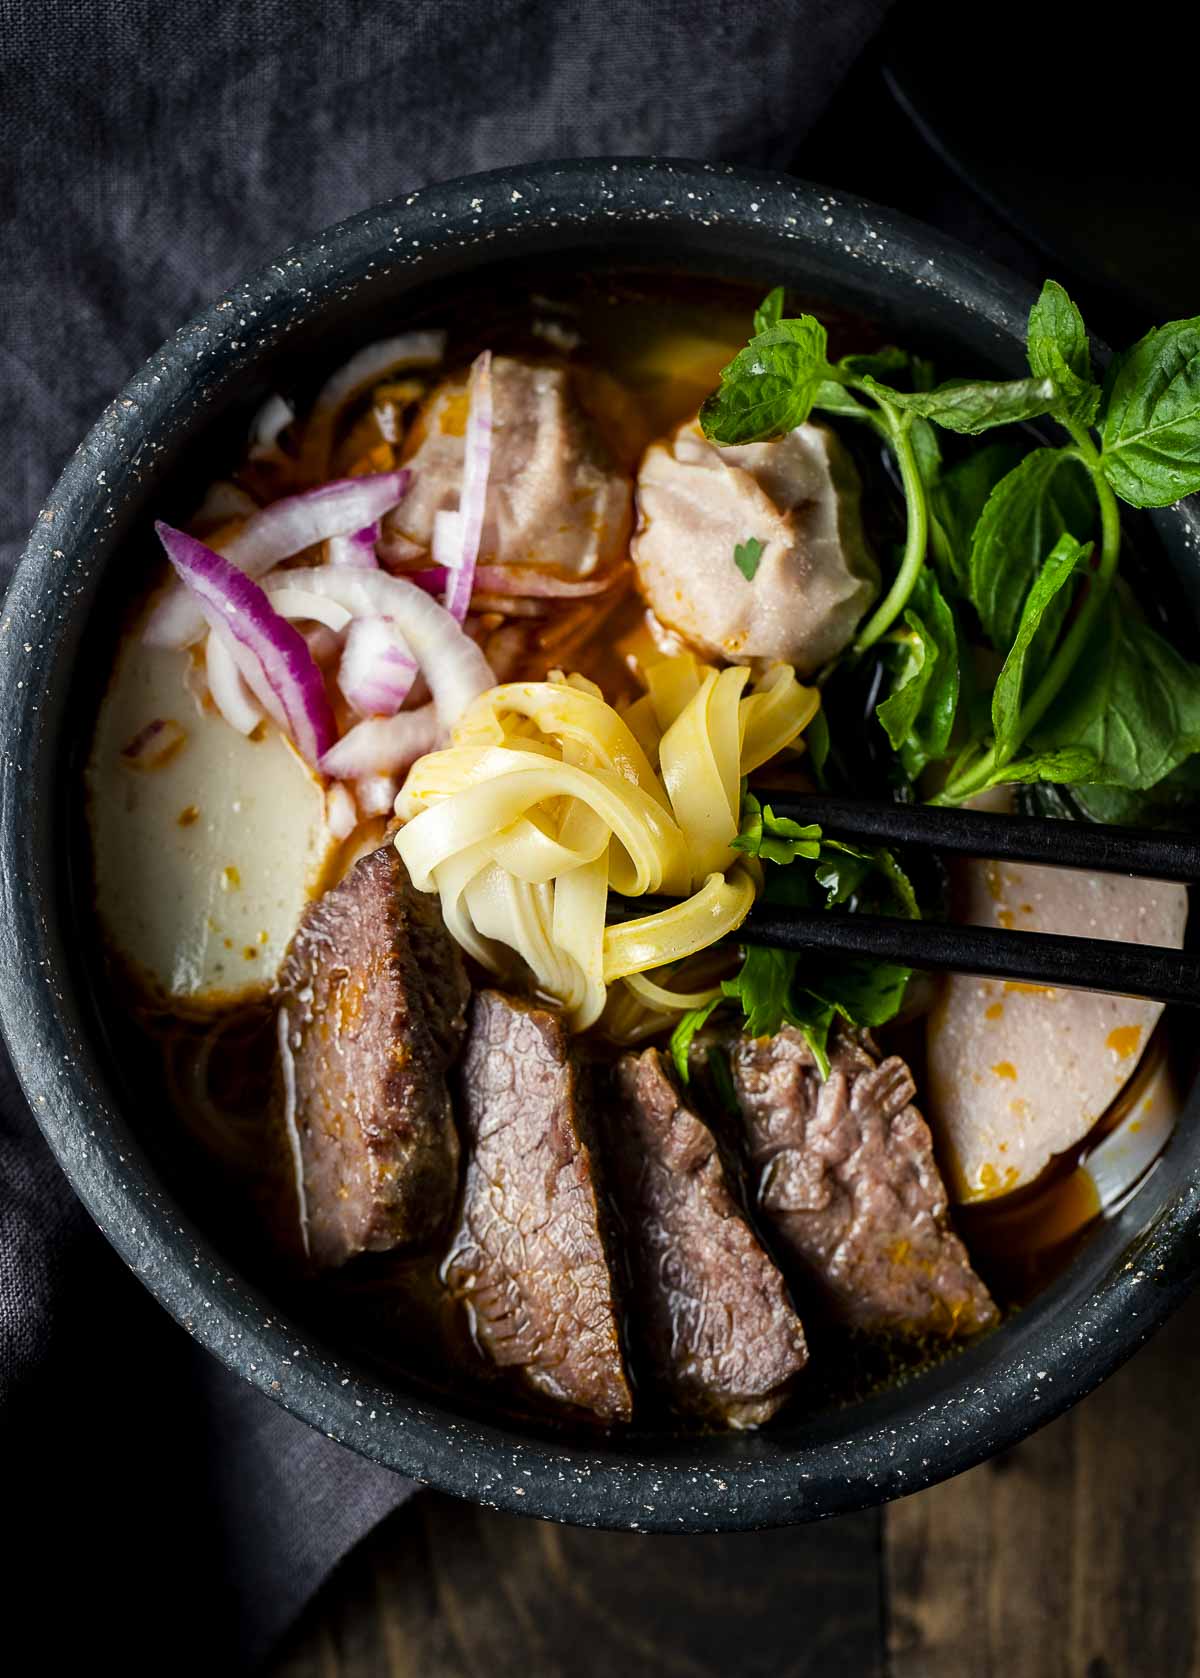 Bun Bo Hue Recipe (Spicy Beef Noodle Soup) - Went Here 8 This